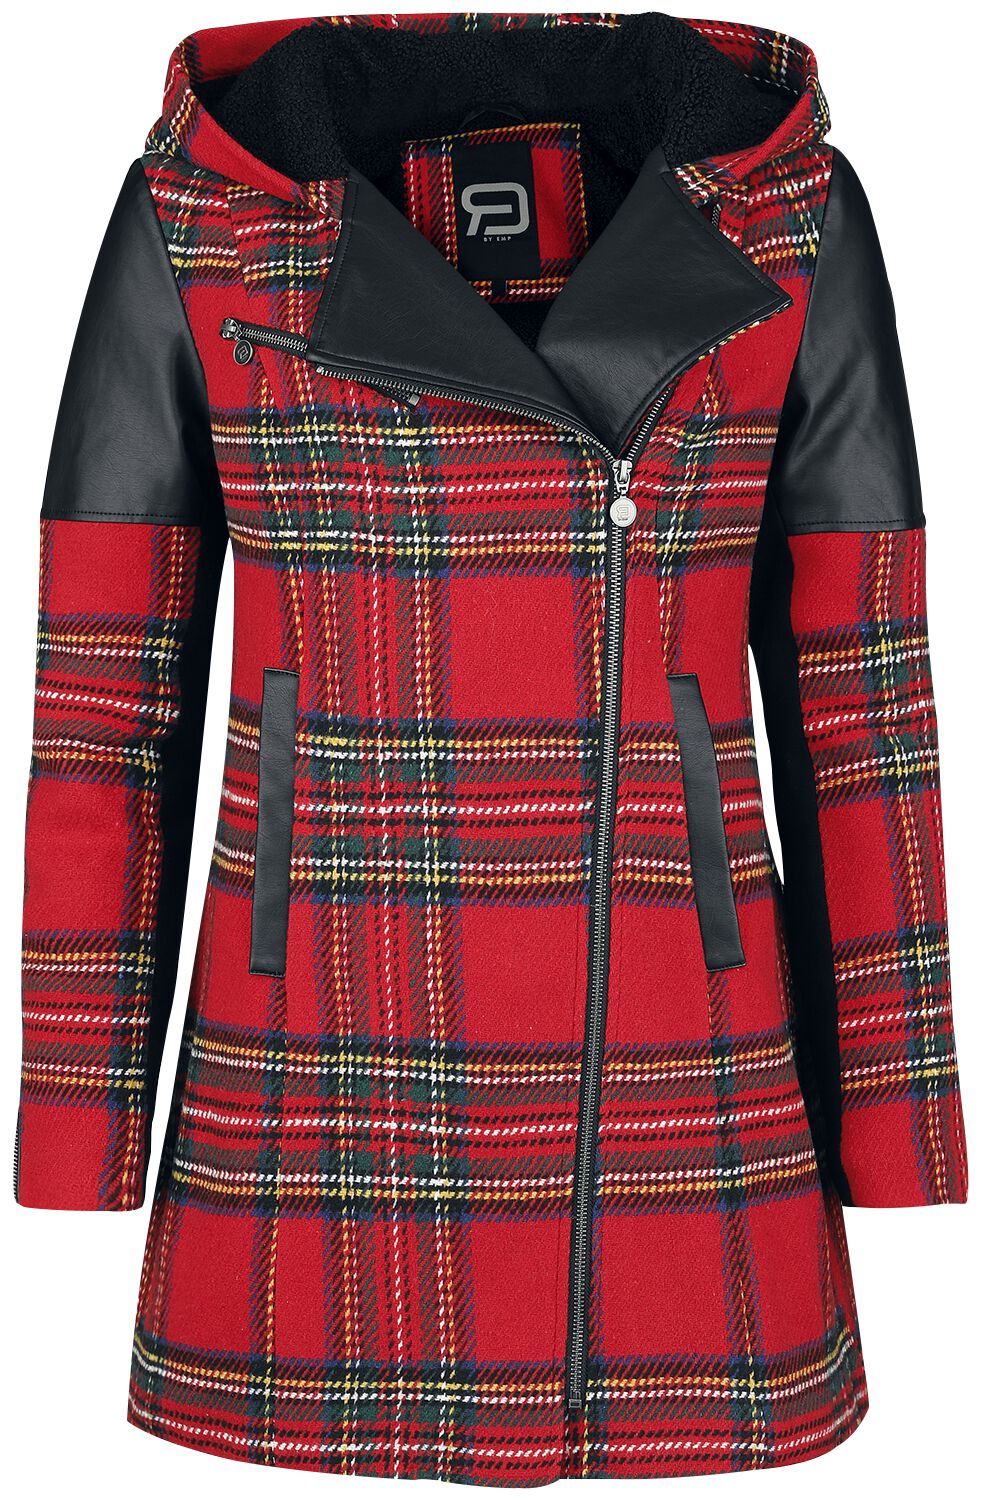 Image of Giacca di mezza stagione di RED by EMP - Biker-style between-seasons jacket - S a XXL - Donna - nero/rosso